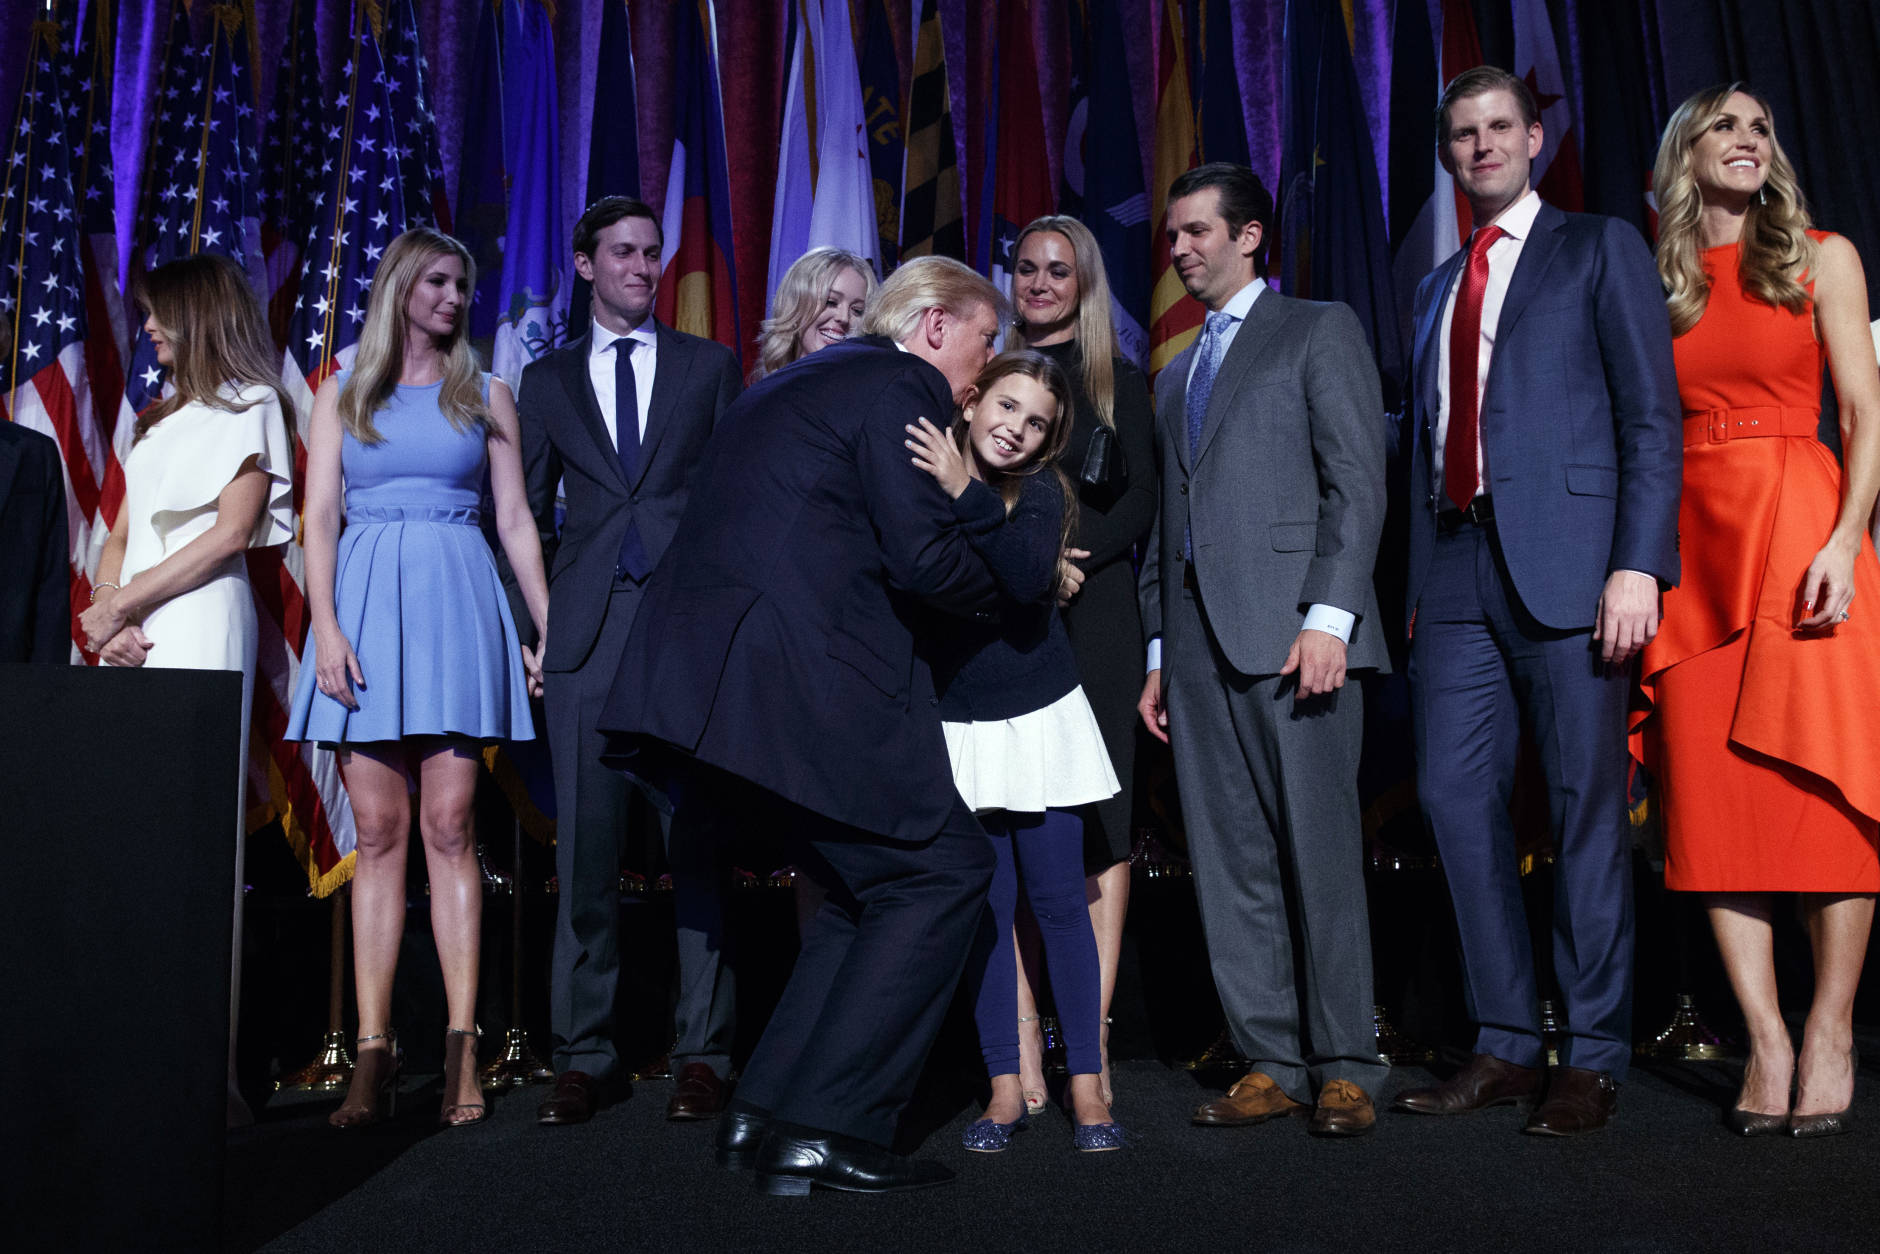 President-elect Donald Trump bends down to kiss his granddaughter Arabella Kushner during an election night rally, Wednesday, Nov. 9, 2016, in New York. (AP Photo/ Evan Vucci)